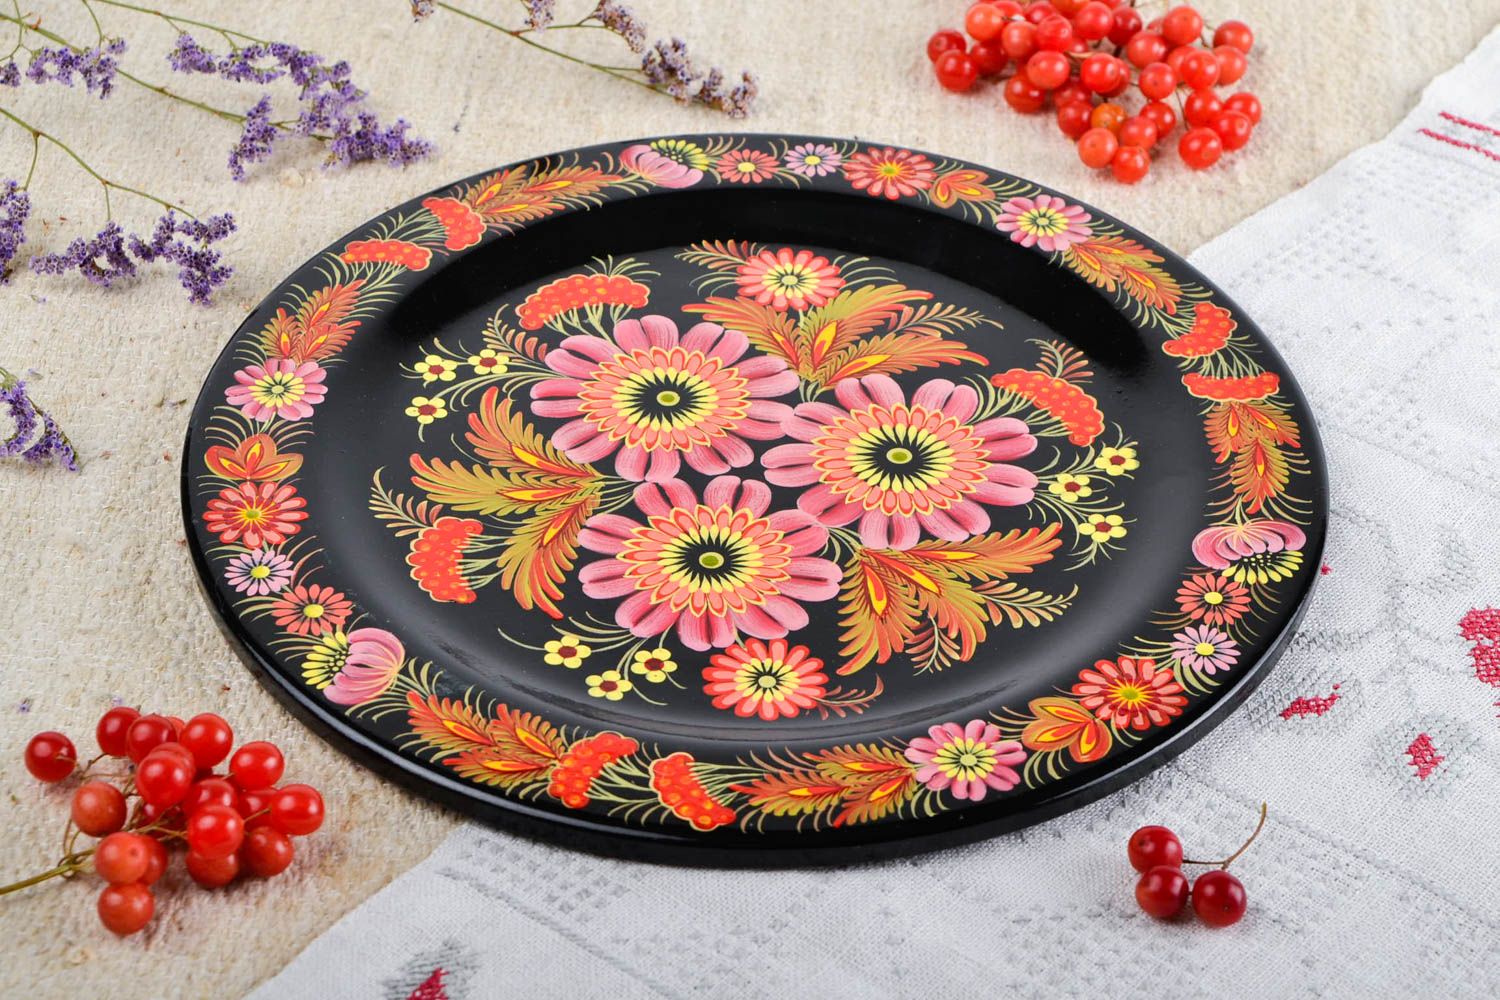 Handmade wood plate painted plate for decorative use only souvenir ideas photo 1